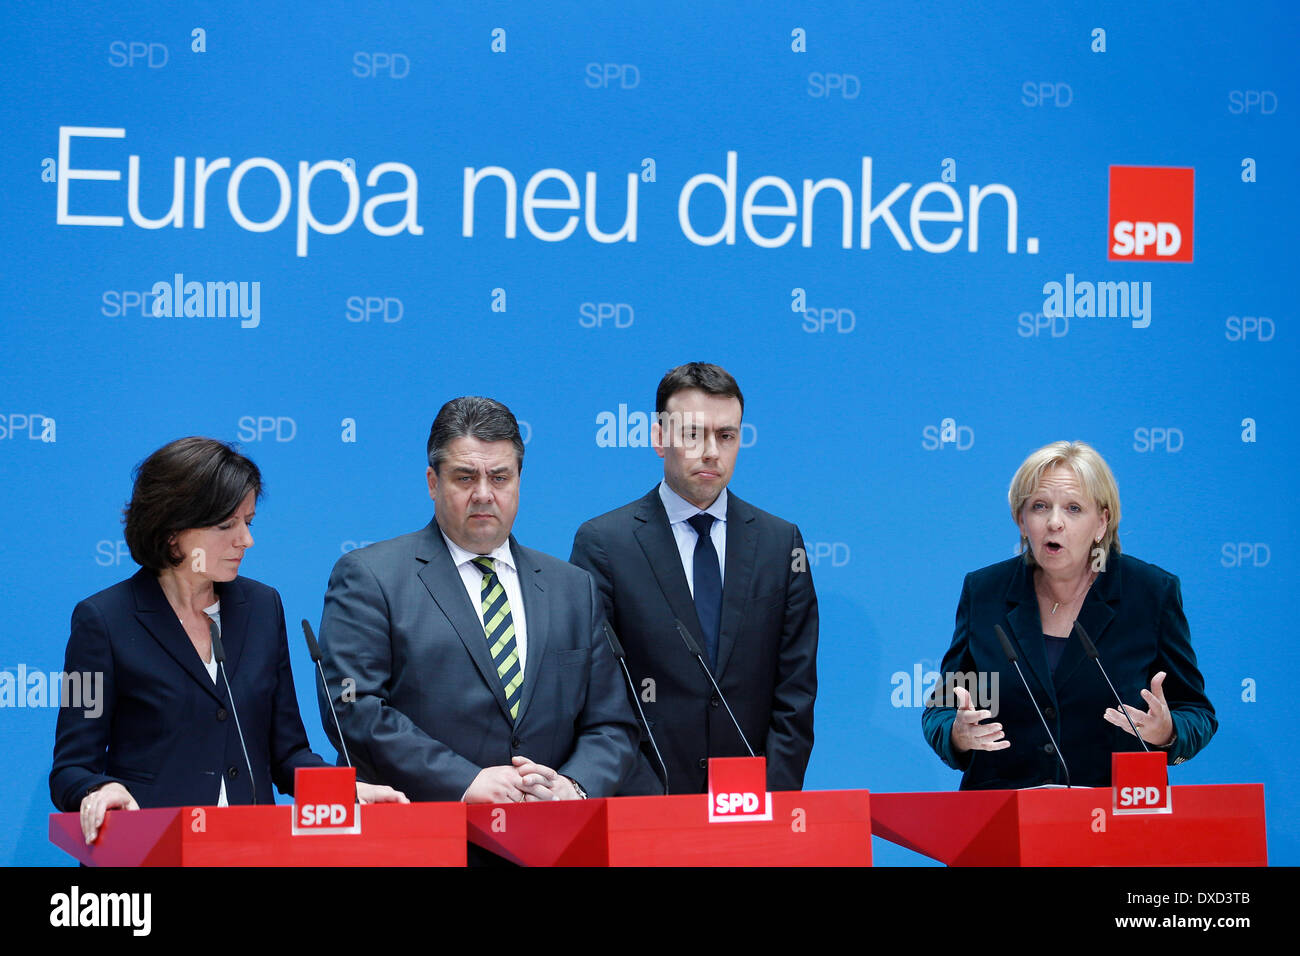 Berlin, Germany. Mars 24th, 2014.Statement on energy policy with Sigmar Gabriel, SPD Chief and Miniter of Economy,  and Hannelore Kraft,Minister-President of North Rhine-Westphalia, and Malu Dreyer, Minister-President of Rhineland-Palatinate, and the Deputy Prime Minister of Baden-WŸrttemberg Nils Schmid at Willy-Brandt-Haus in Berlin. / Picture: Sigmar Gabriel, SPD Chief and Miniter of Economy,  and Hannelore Kraft,Minister-President of North Rhine-Westphalia, and Malu Dreyer, Minister-President of Rhineland-Palatinate, and the Deputy Prime Minister of Baden-WŸrttemberg Nils Schmid Stock Photo